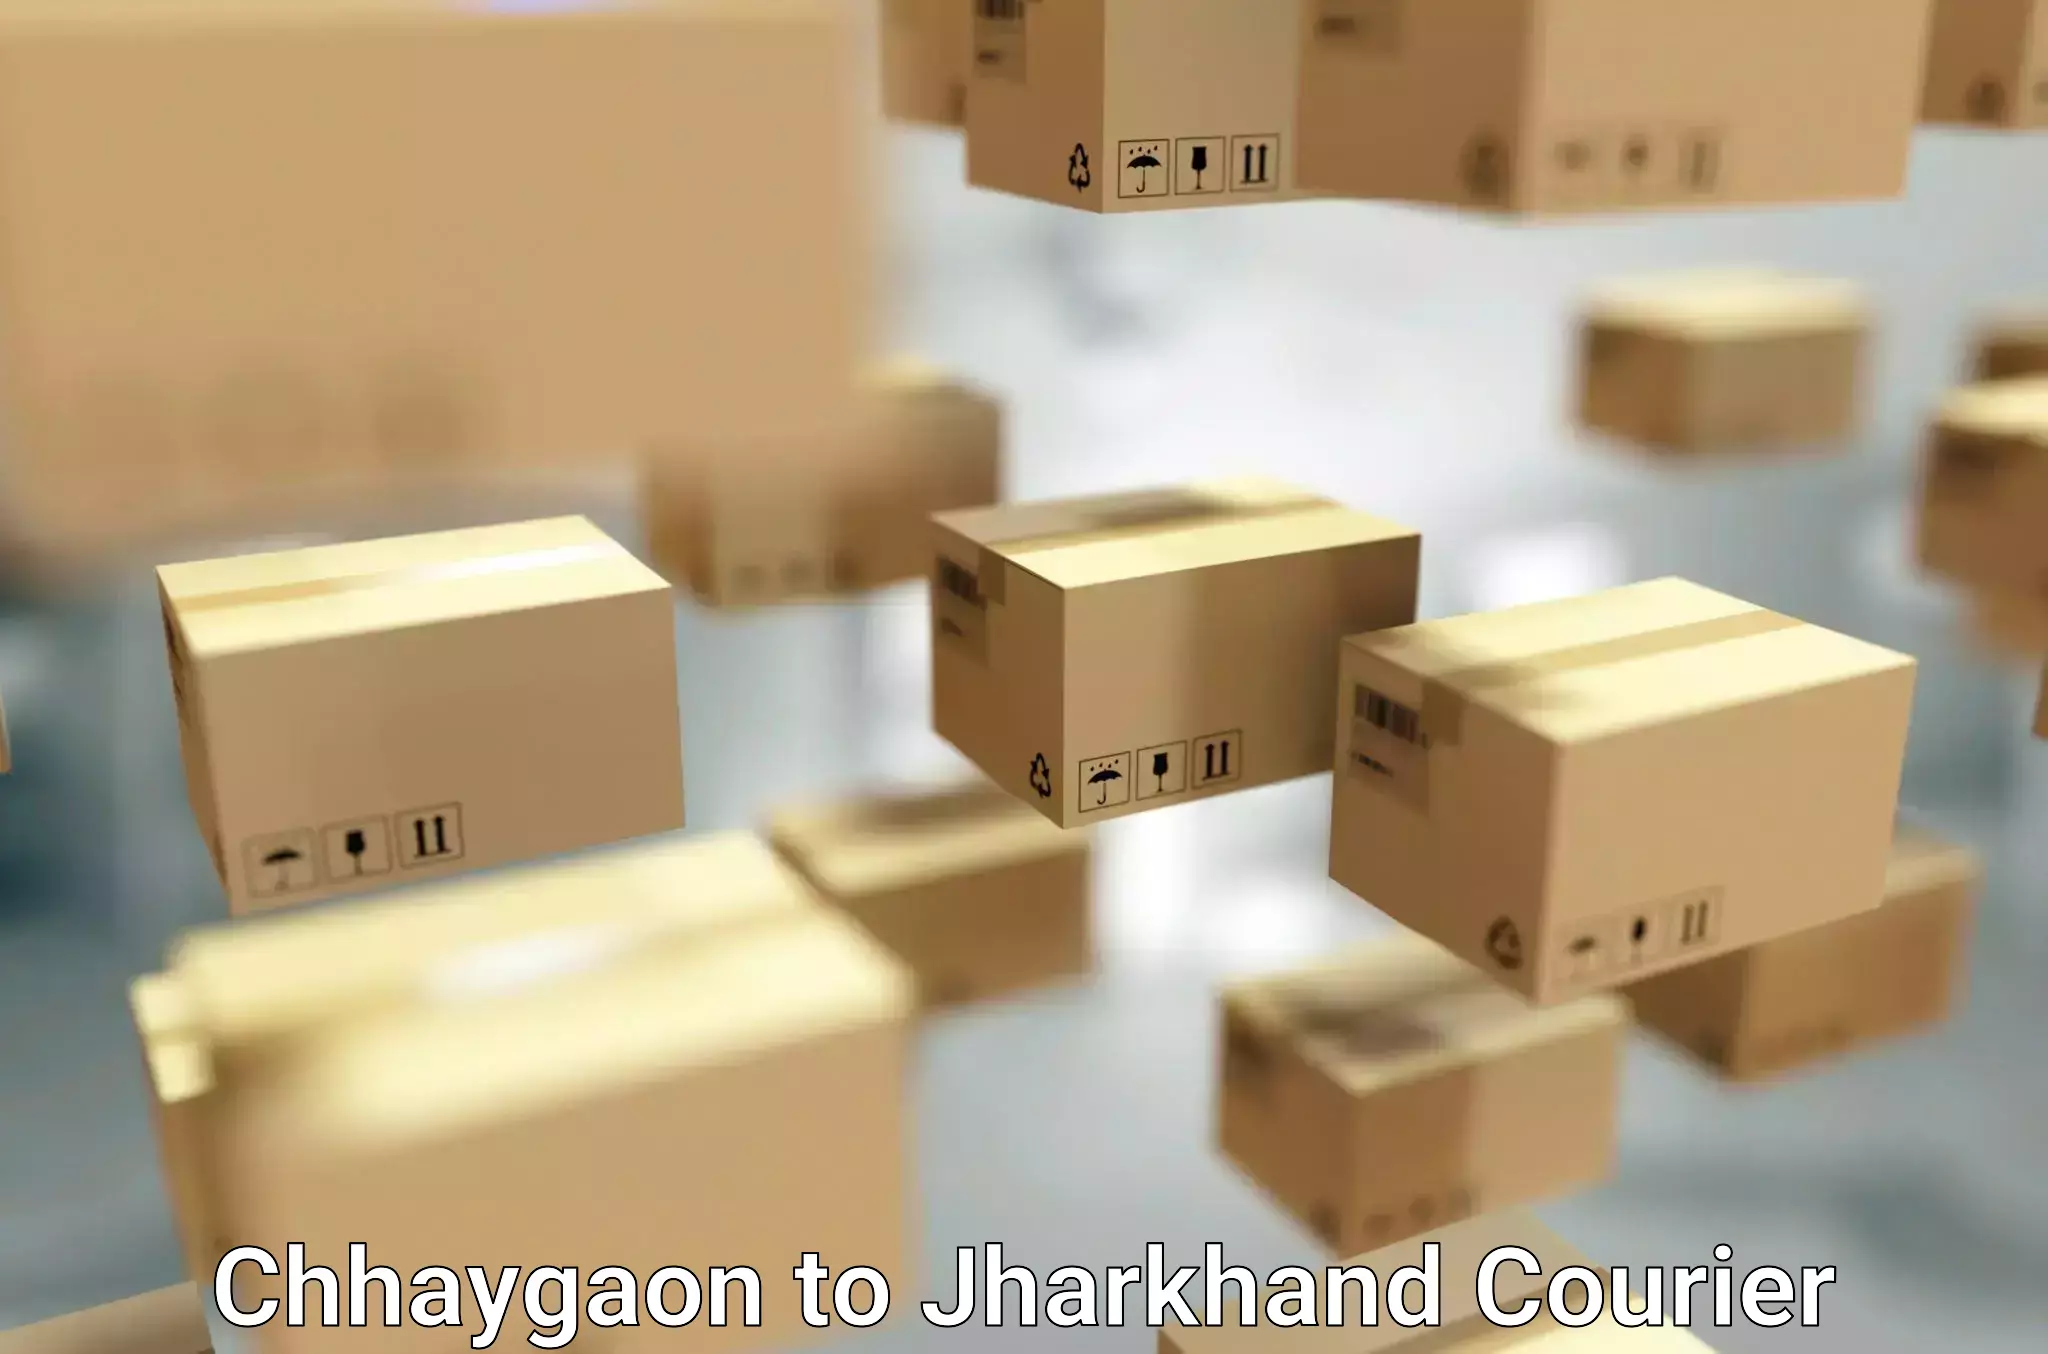 Trusted relocation services Chhaygaon to Chaibasa